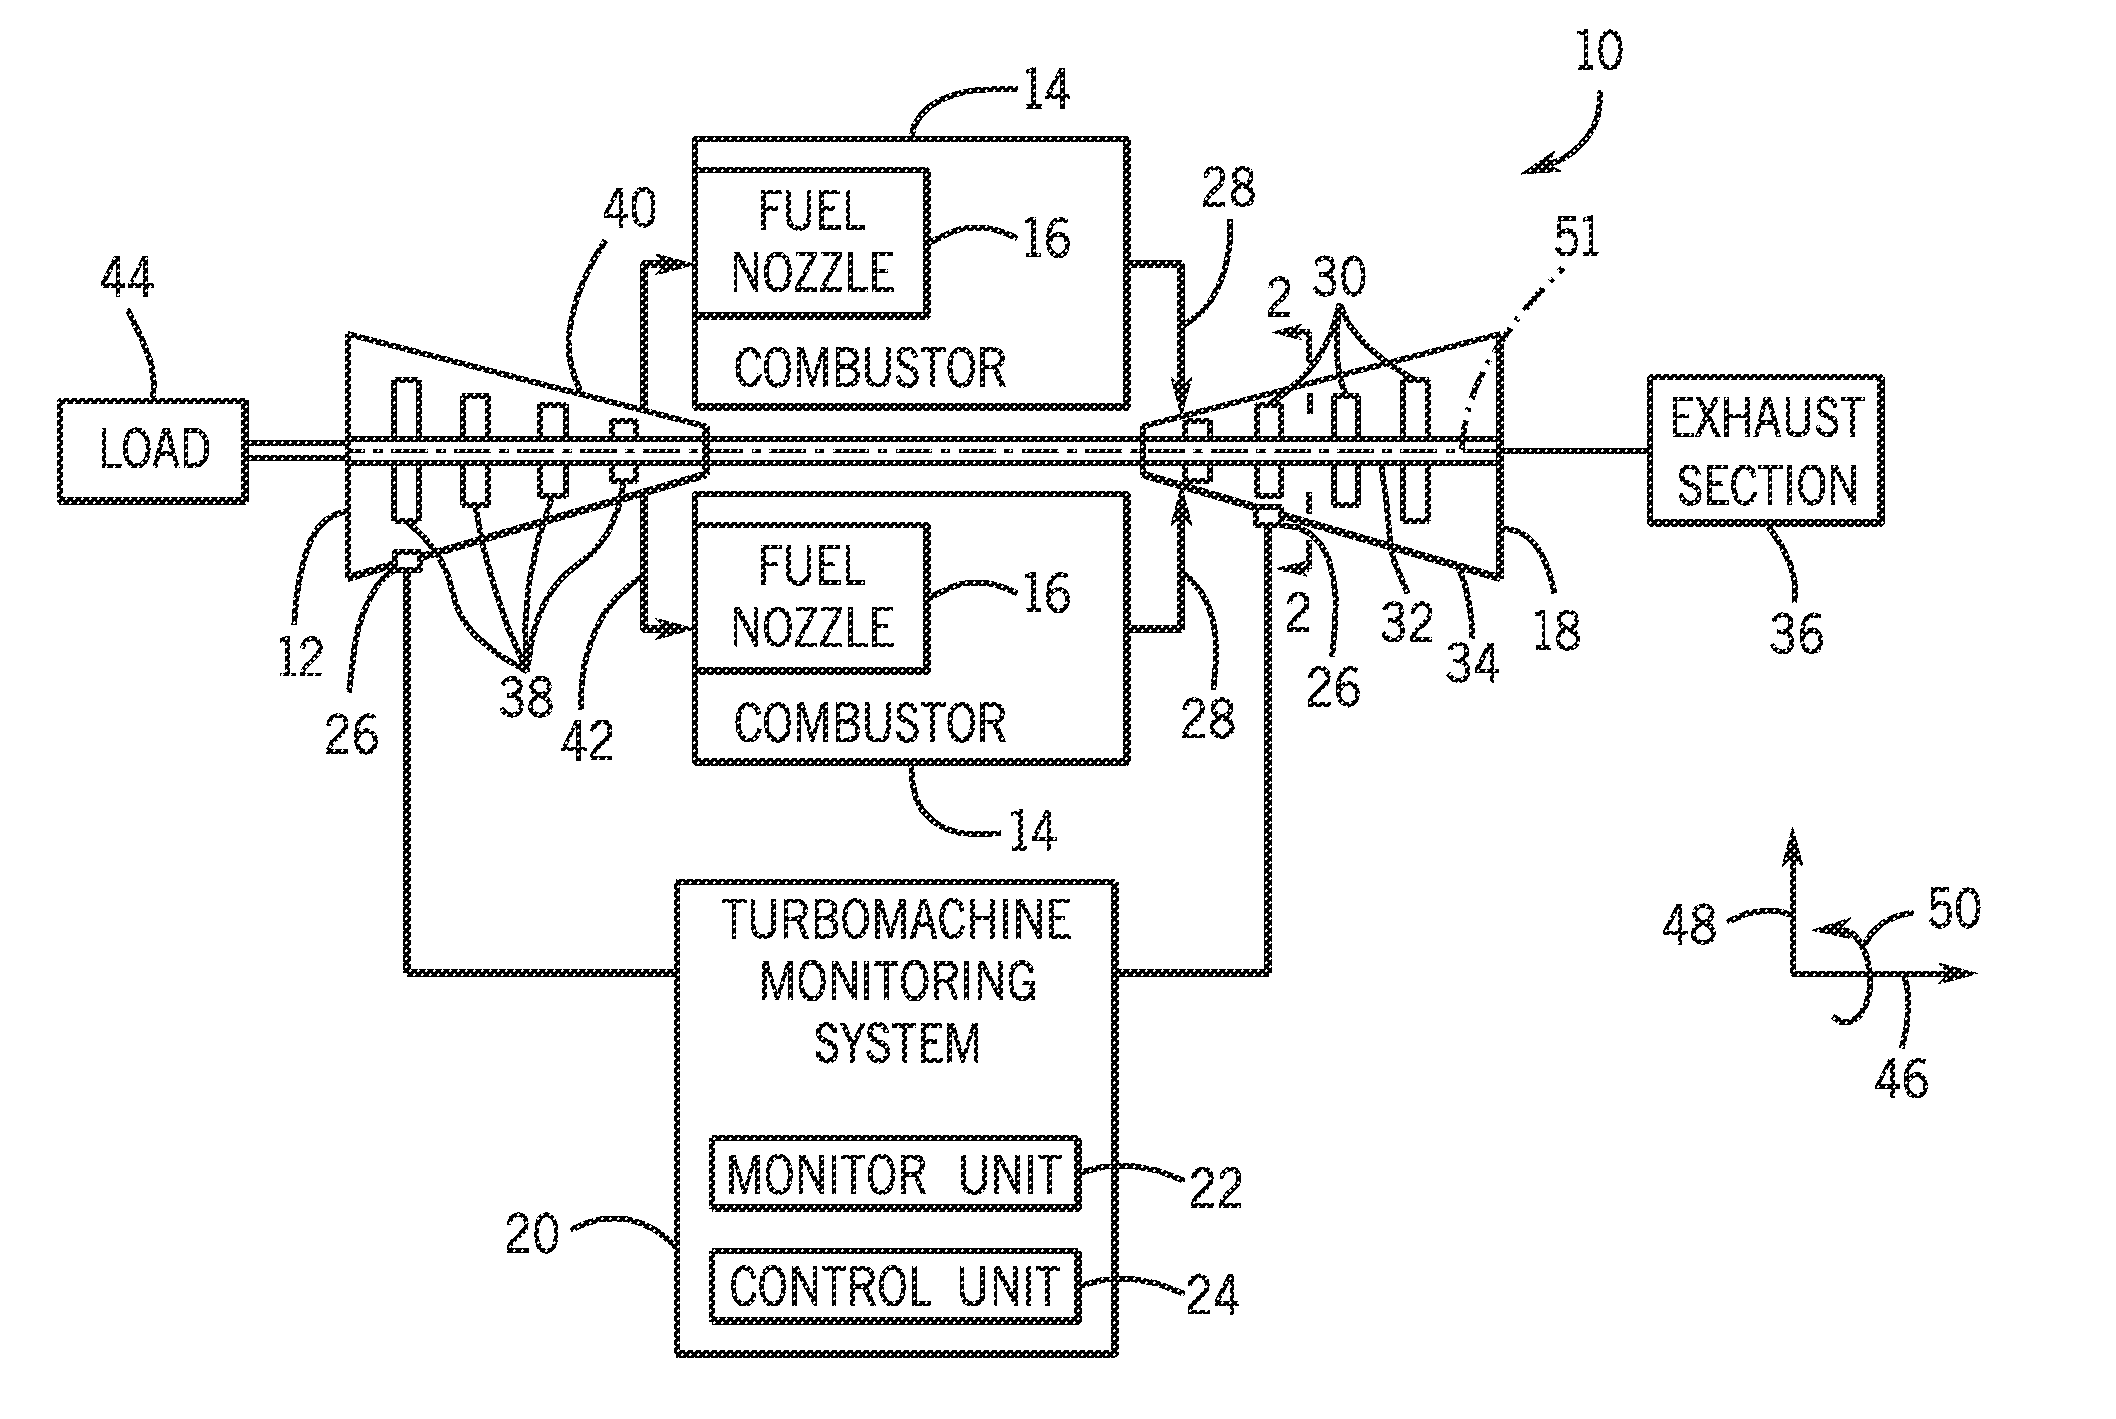 Seal system and method for system probe